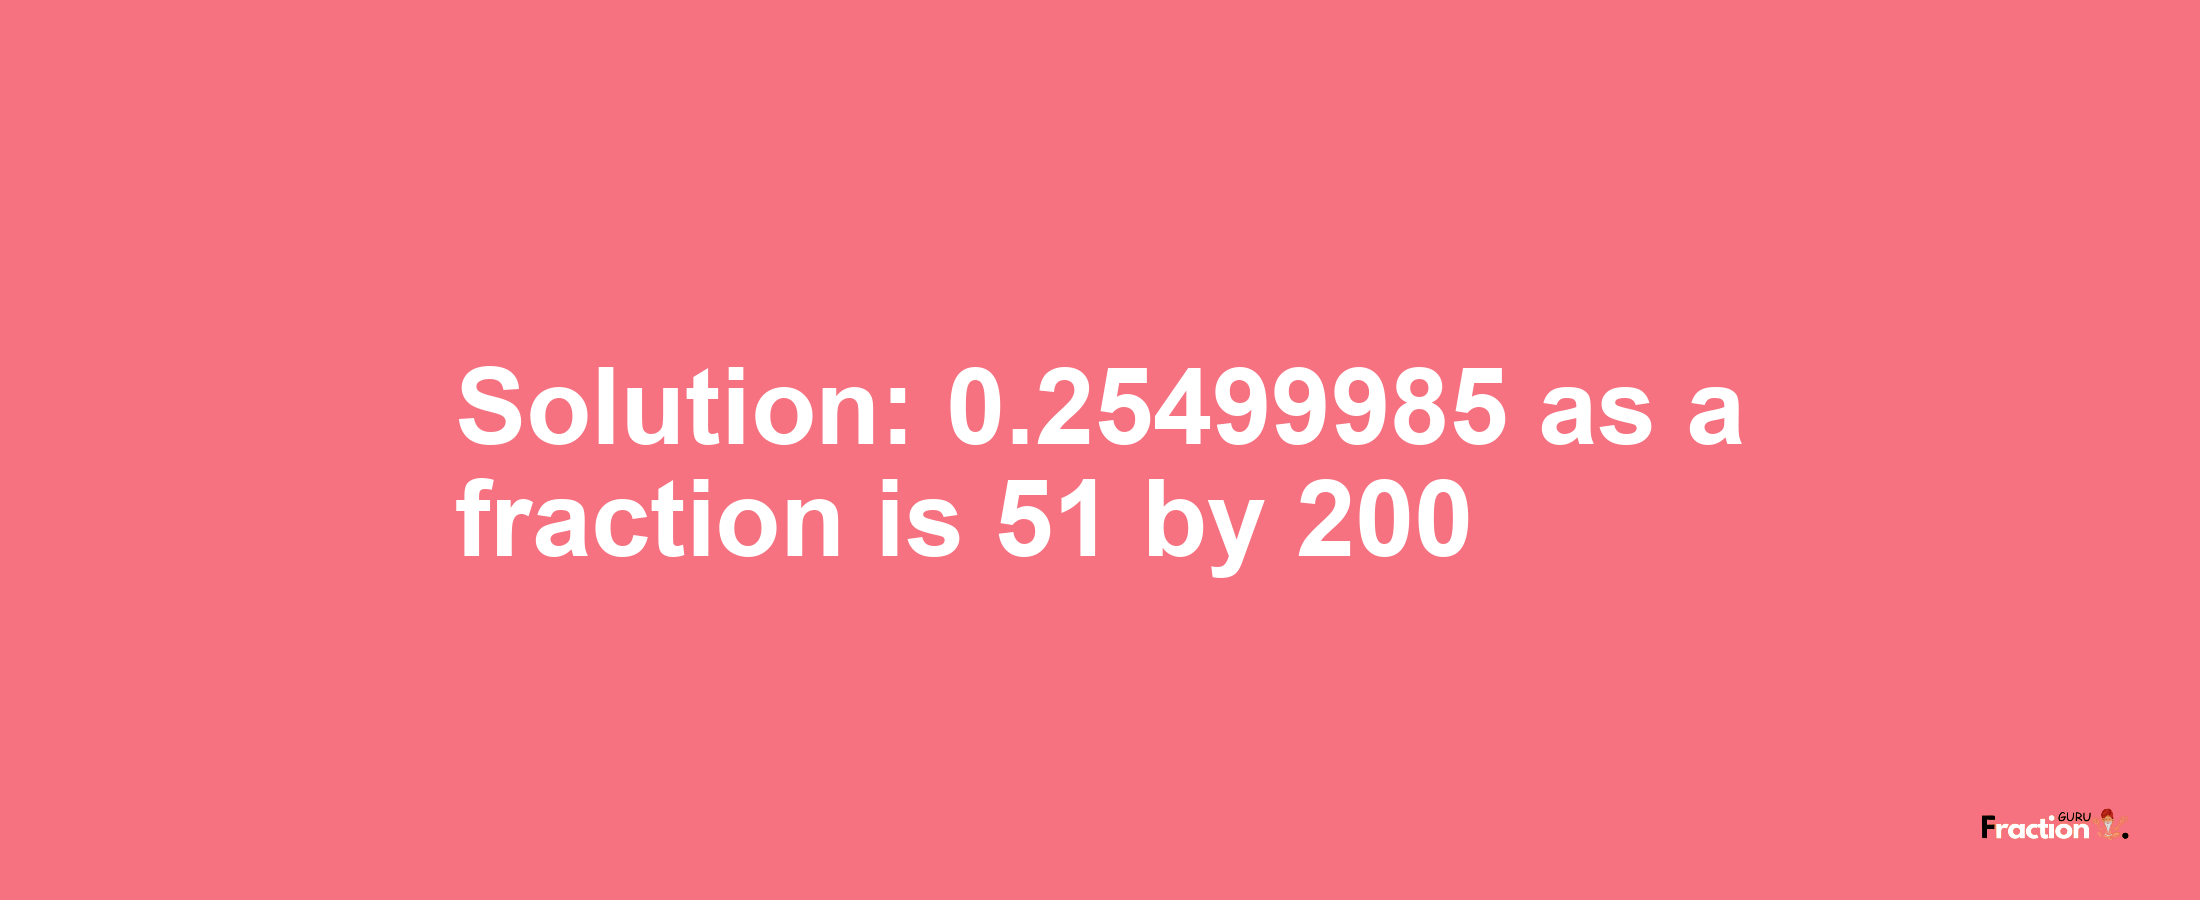 Solution:0.25499985 as a fraction is 51/200